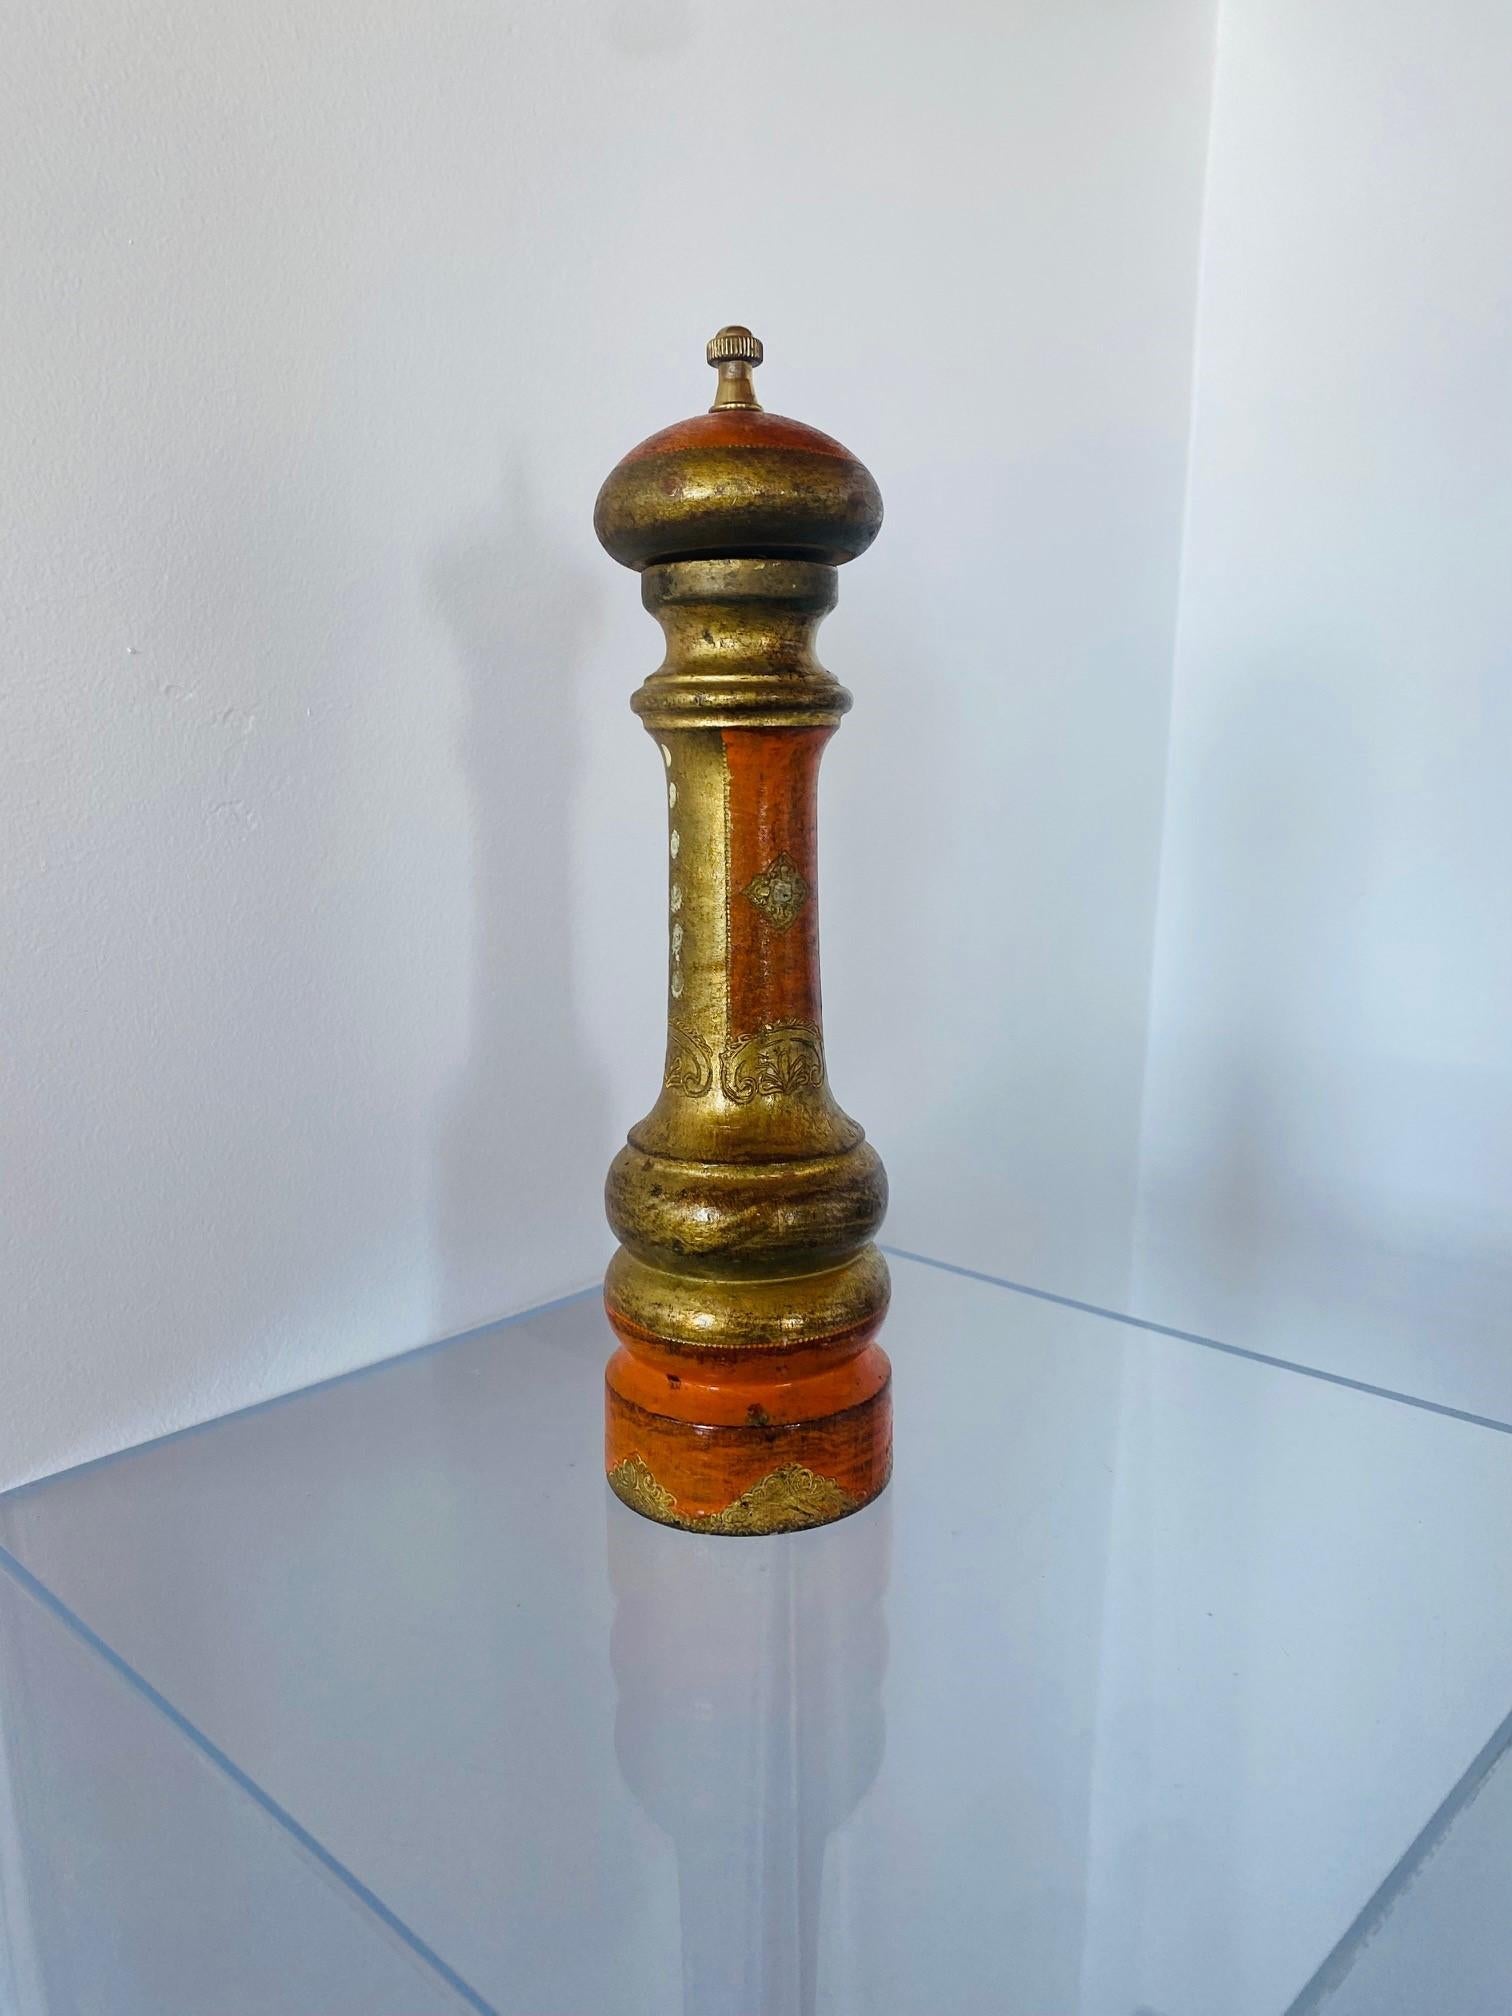 Beautiful piece from the 1970s made in Italy. This piece is vintage and sculptural. The design is unique, starting with a brass finial at the top and running down in sculpted curved lines in gilt and golden orange hues. This piece combines Borghese